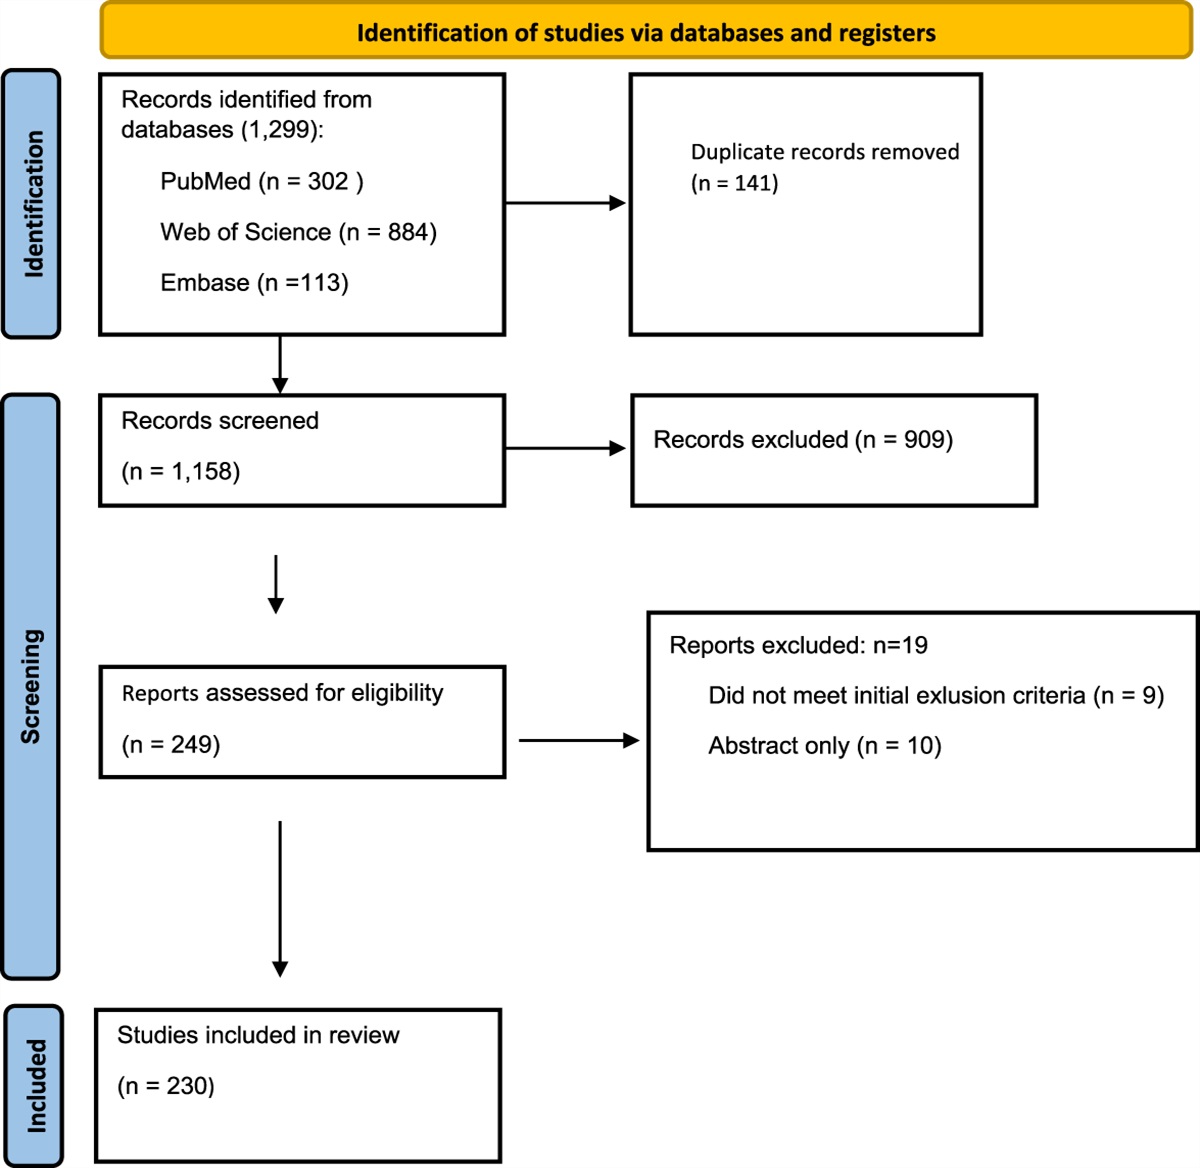 Are Orthopaedic Clinical Trials Linguistically and Culturally Diverse?: A Systematic Review